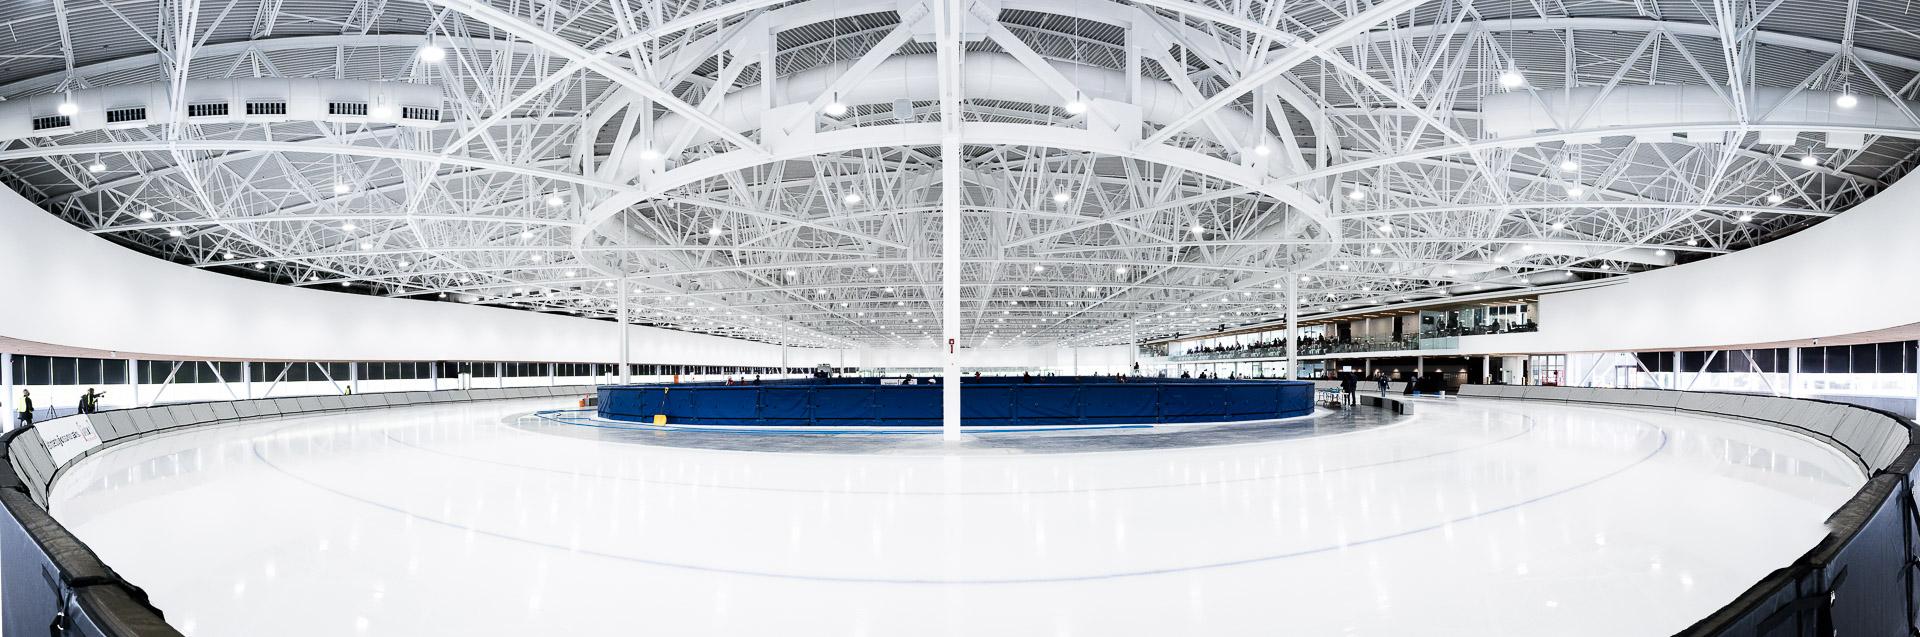 Olympic ice rink of Centre de glaces